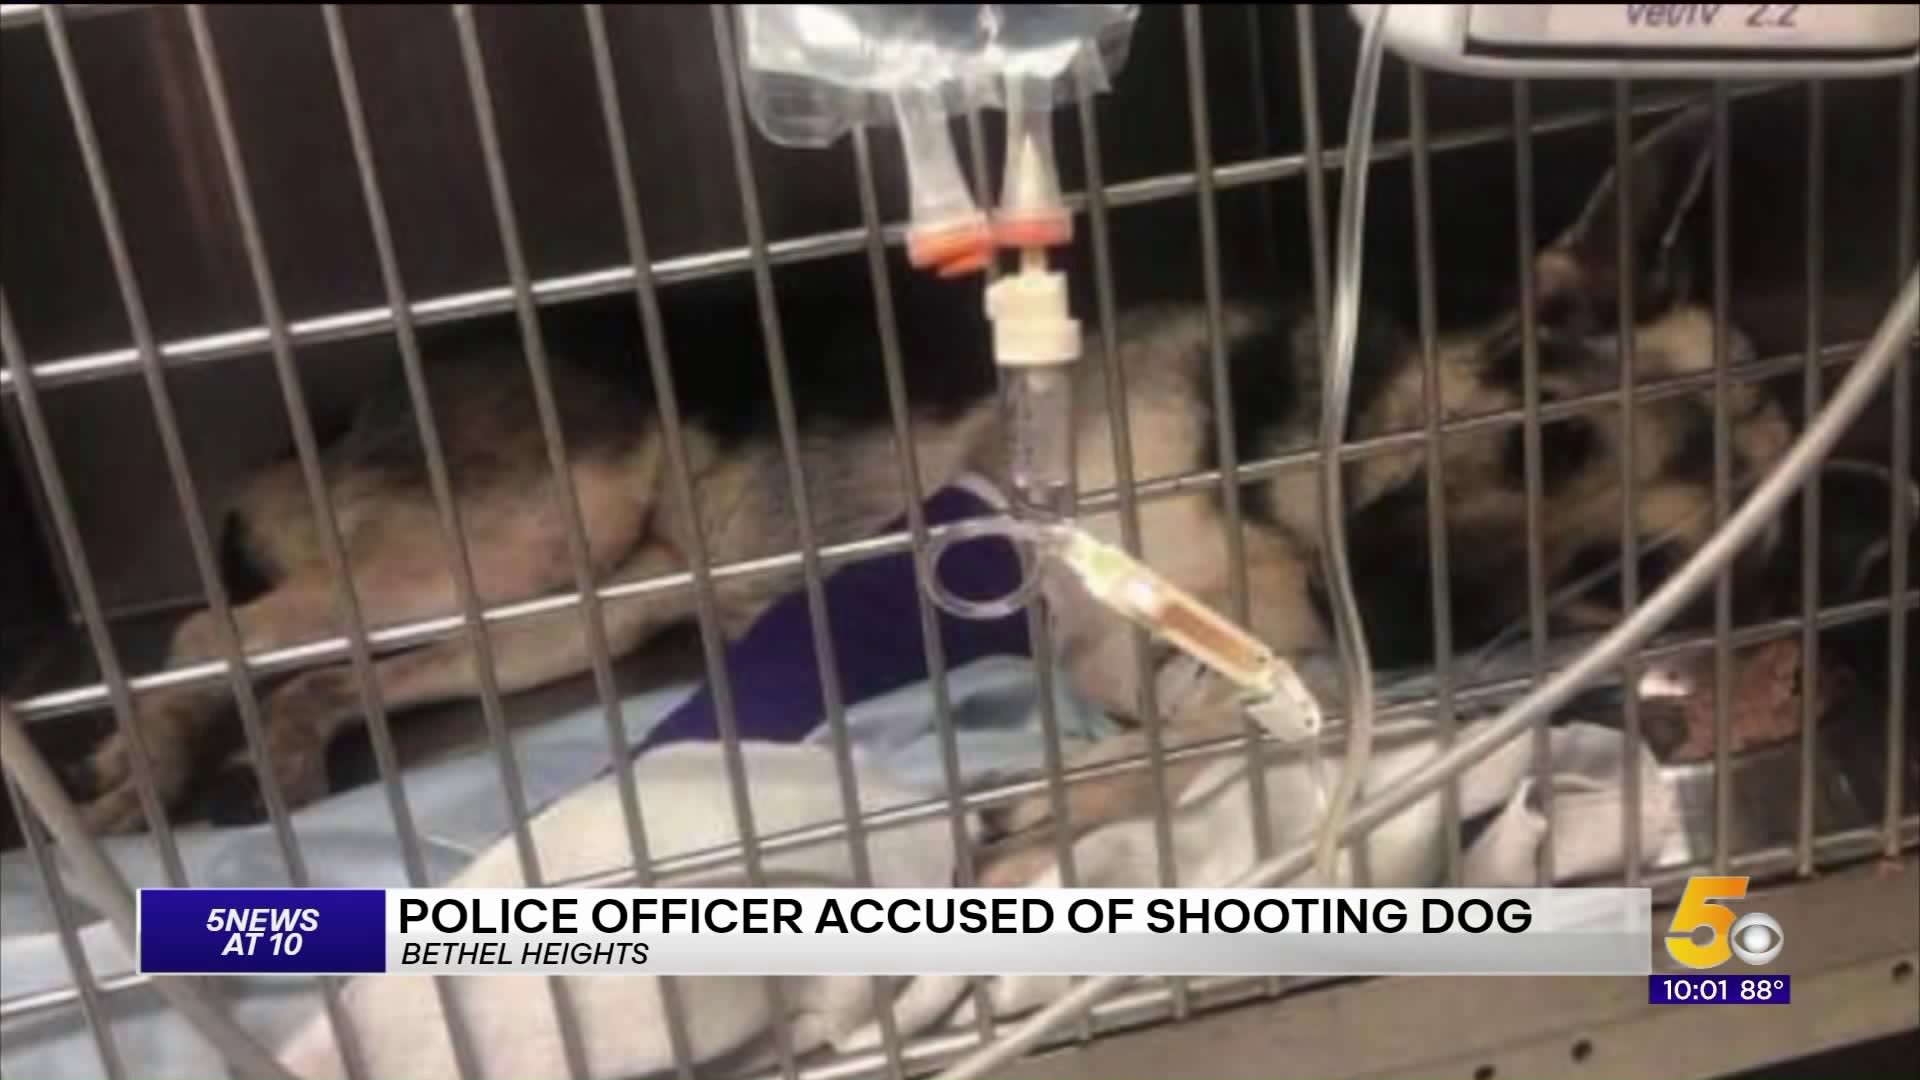 Police Officer Accused of Shooting Dog